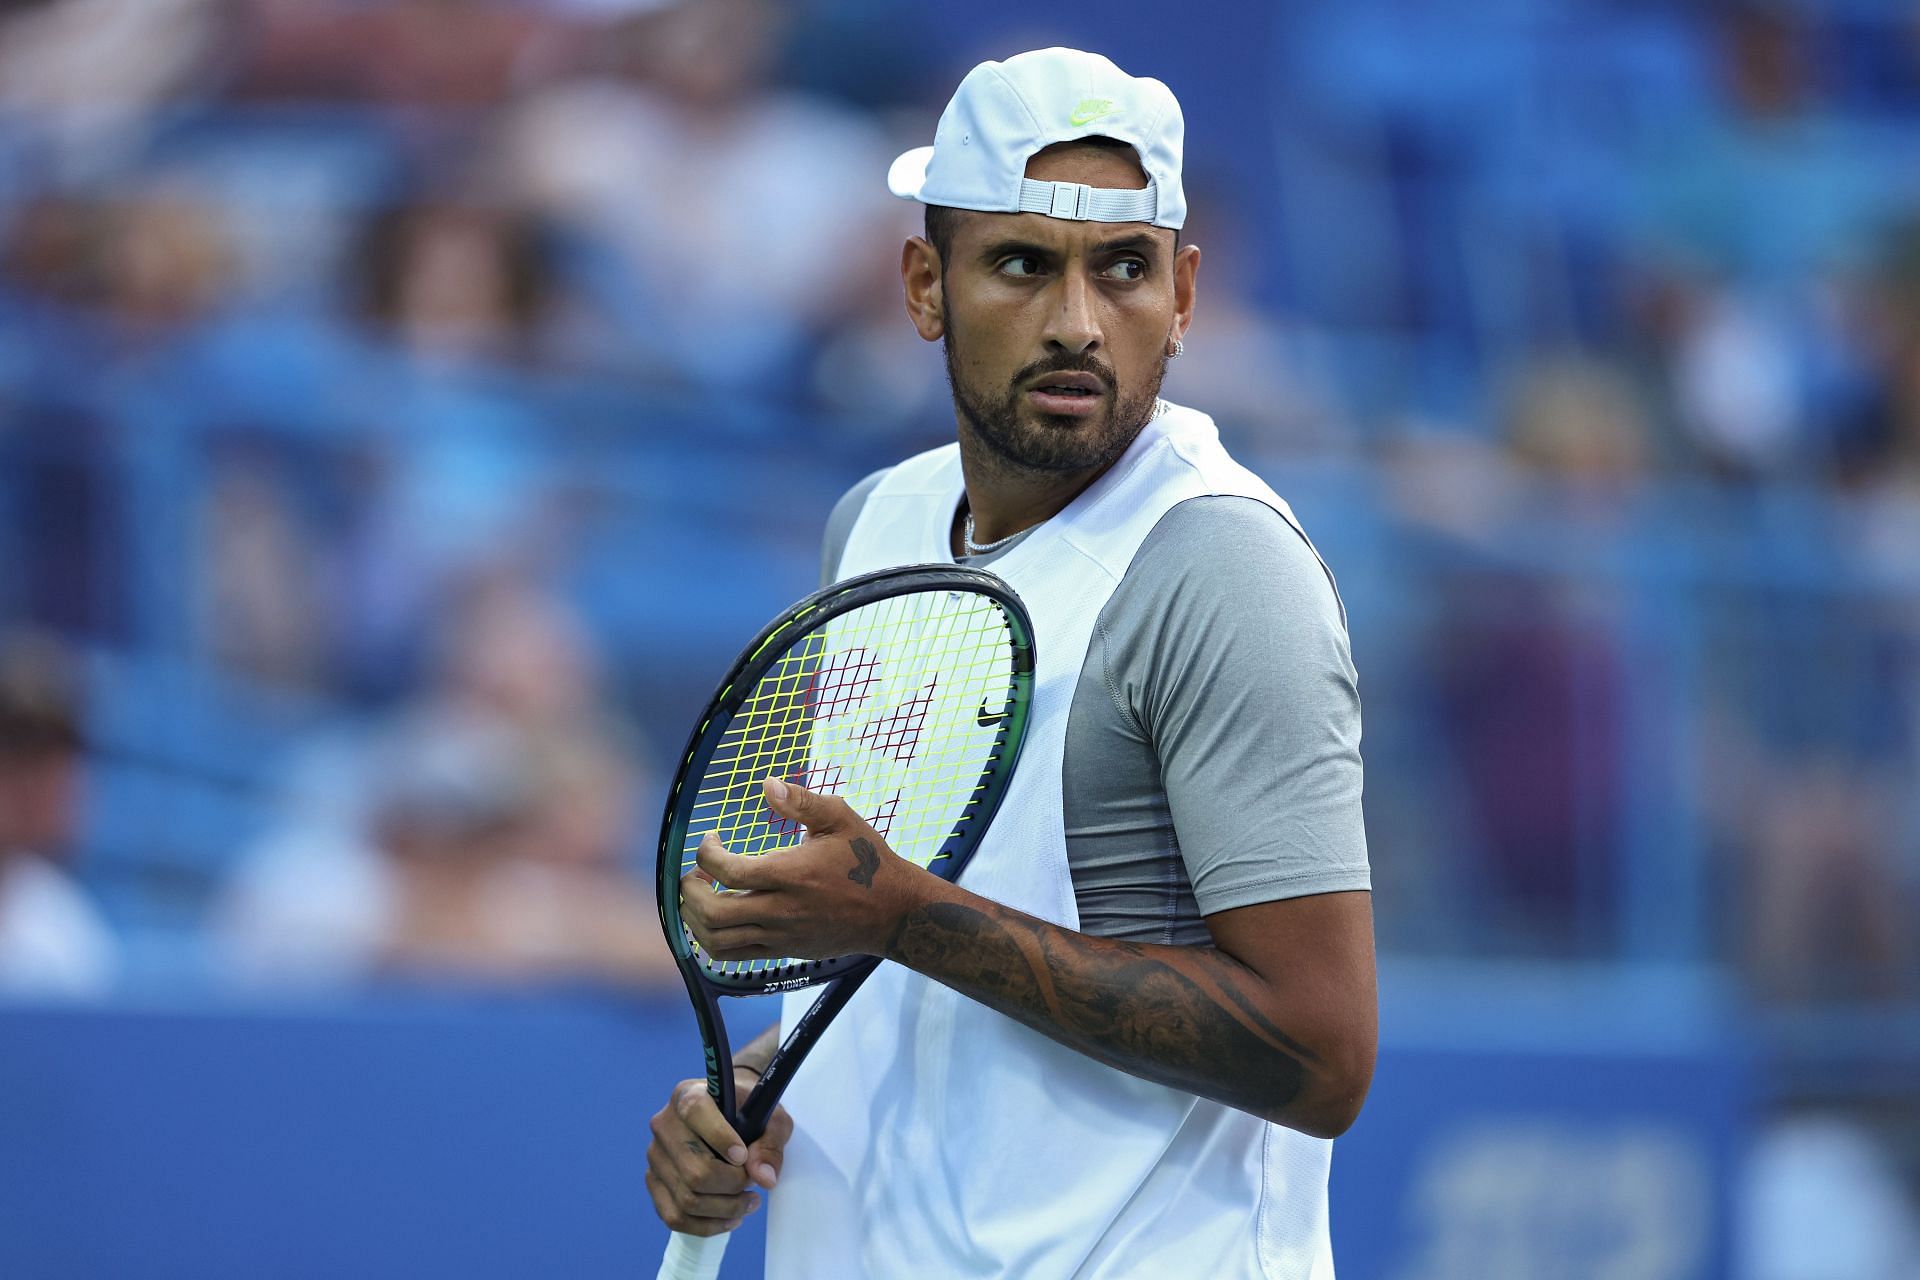 Nick Kyrgios is set to return home after the US Open.